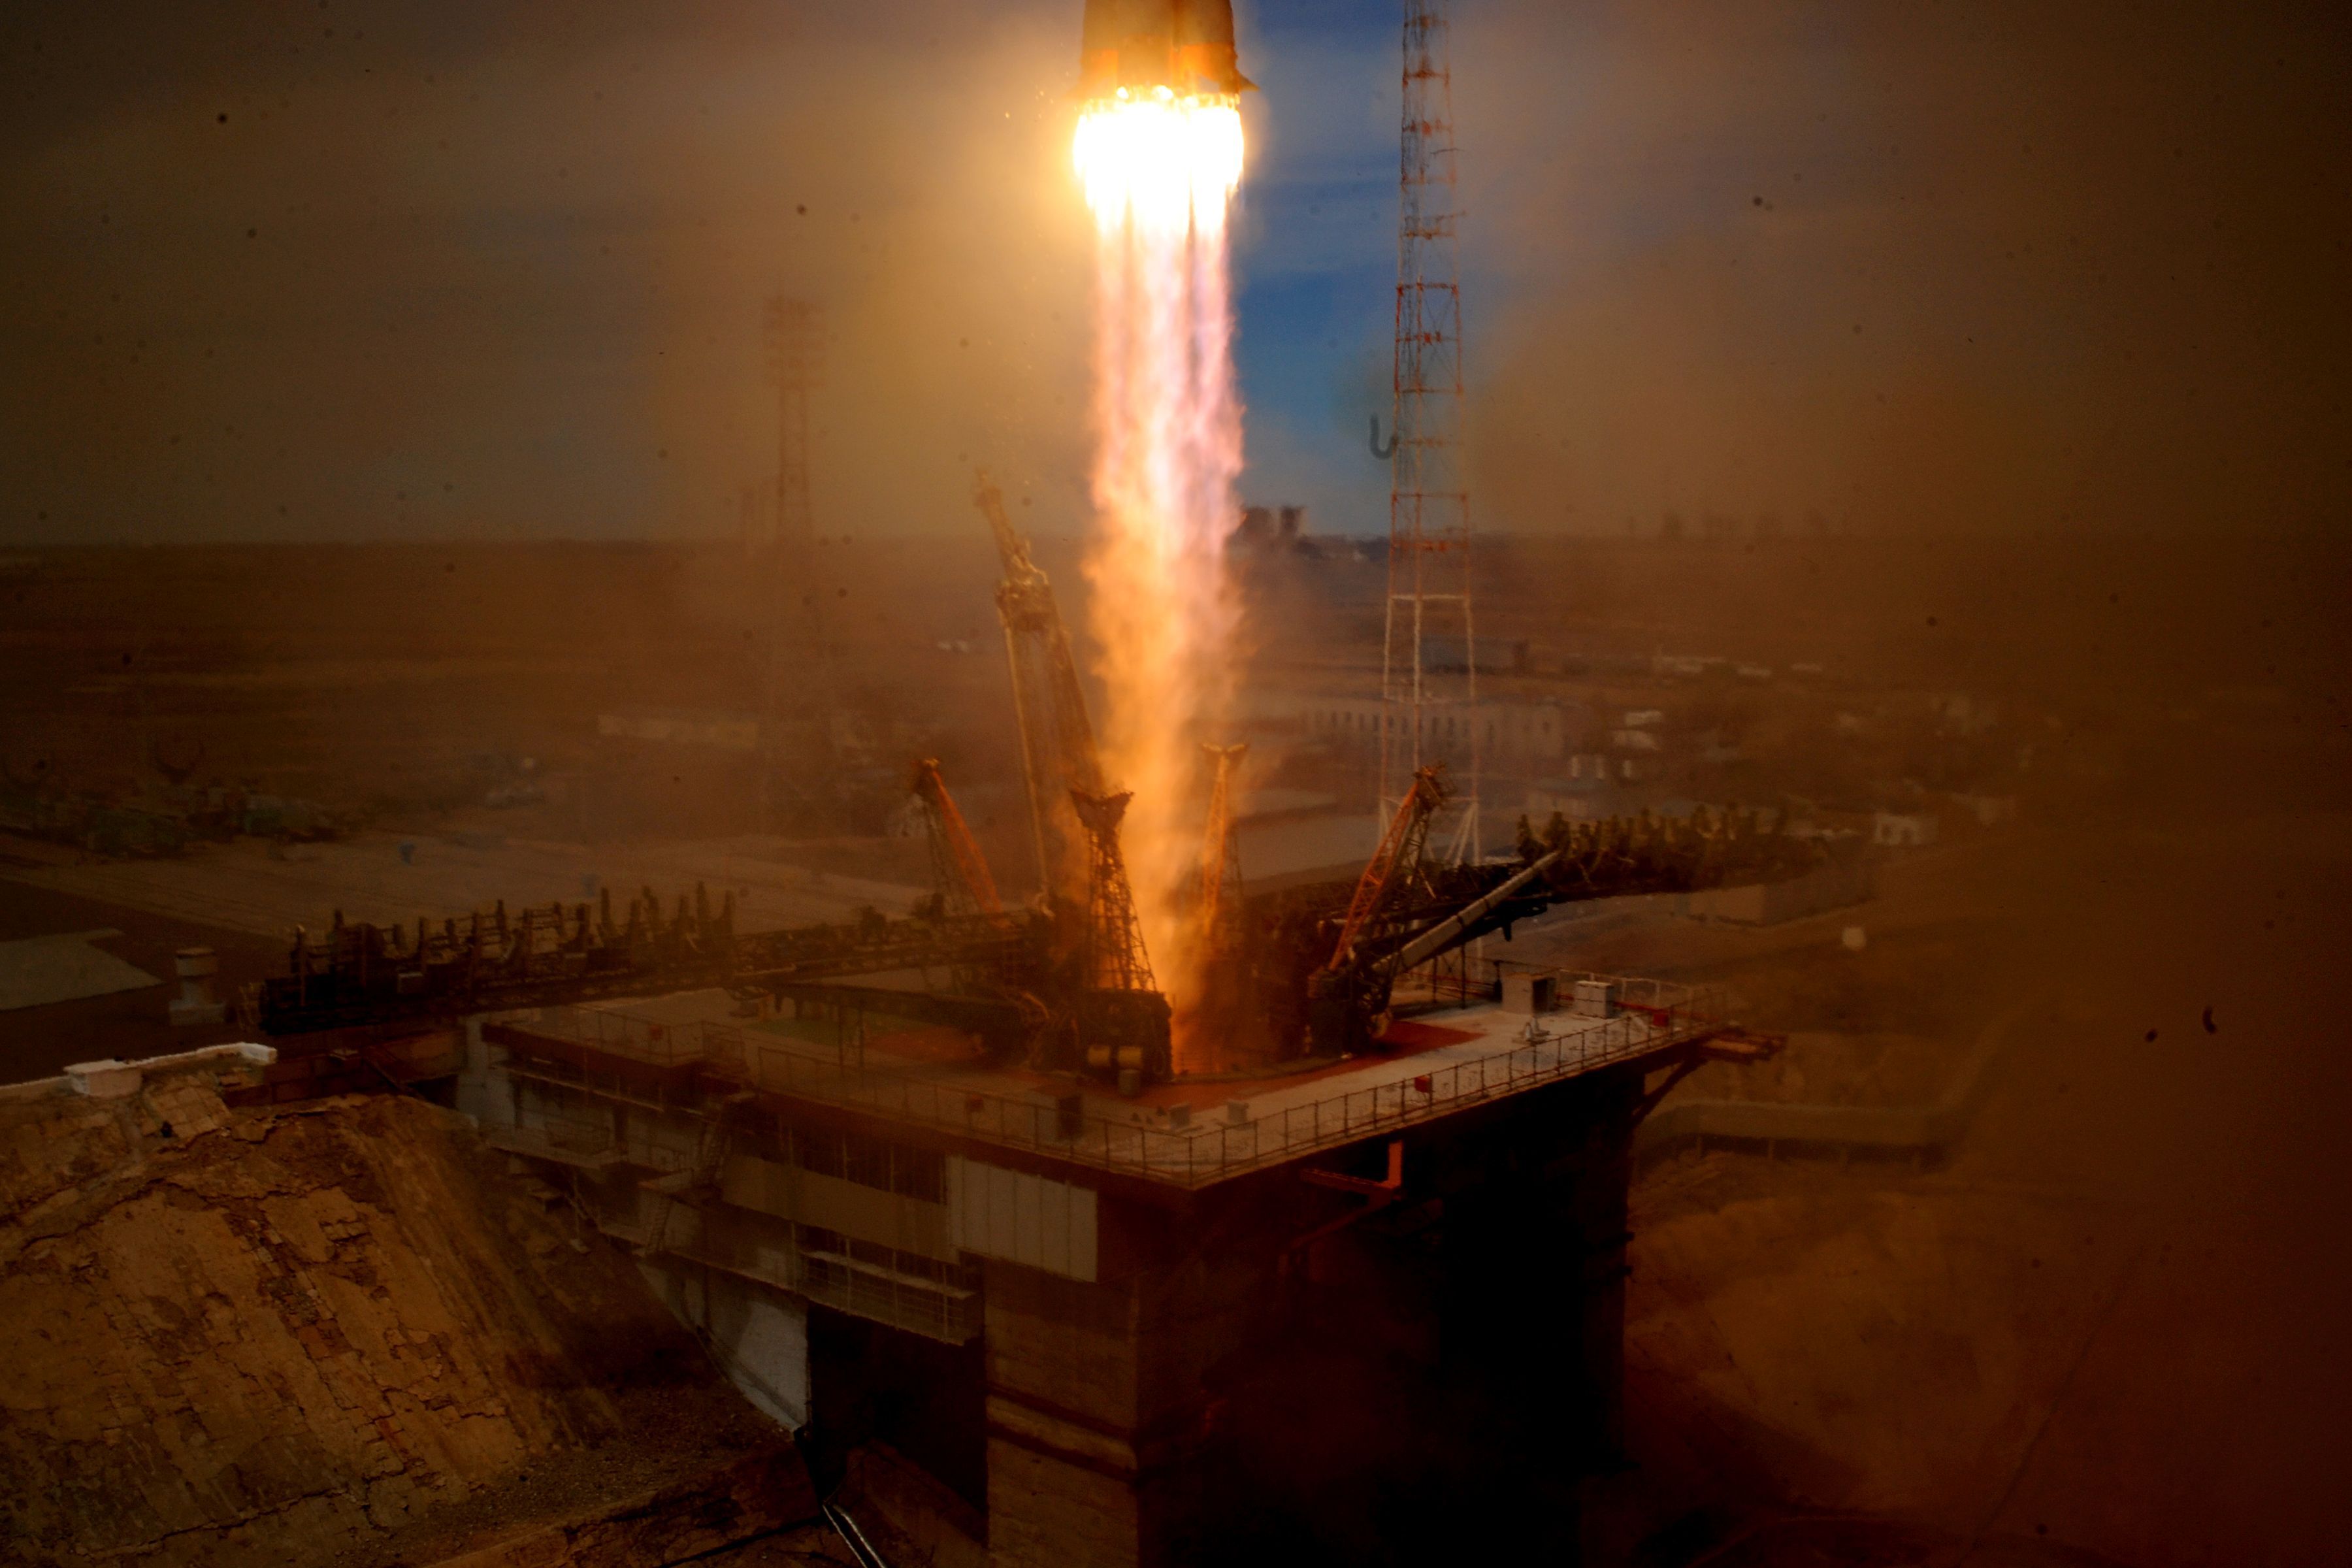 TOPSHOT - Russia's Soyuz MS-04 spacecraft carrying Russian cosmonaut Fyodor Yurchikhin and NASA astronaut Jack David Fischer, members of the main crew of the 51/52 expedition to the International Space Station (ISS), blasts off to the ISS from the launch pad at the Russian-leased Baikonur cosmodrome on April 20, 2017. / AFP PHOTO / Kirill KUDRYAVTSEV / TT / kod 444